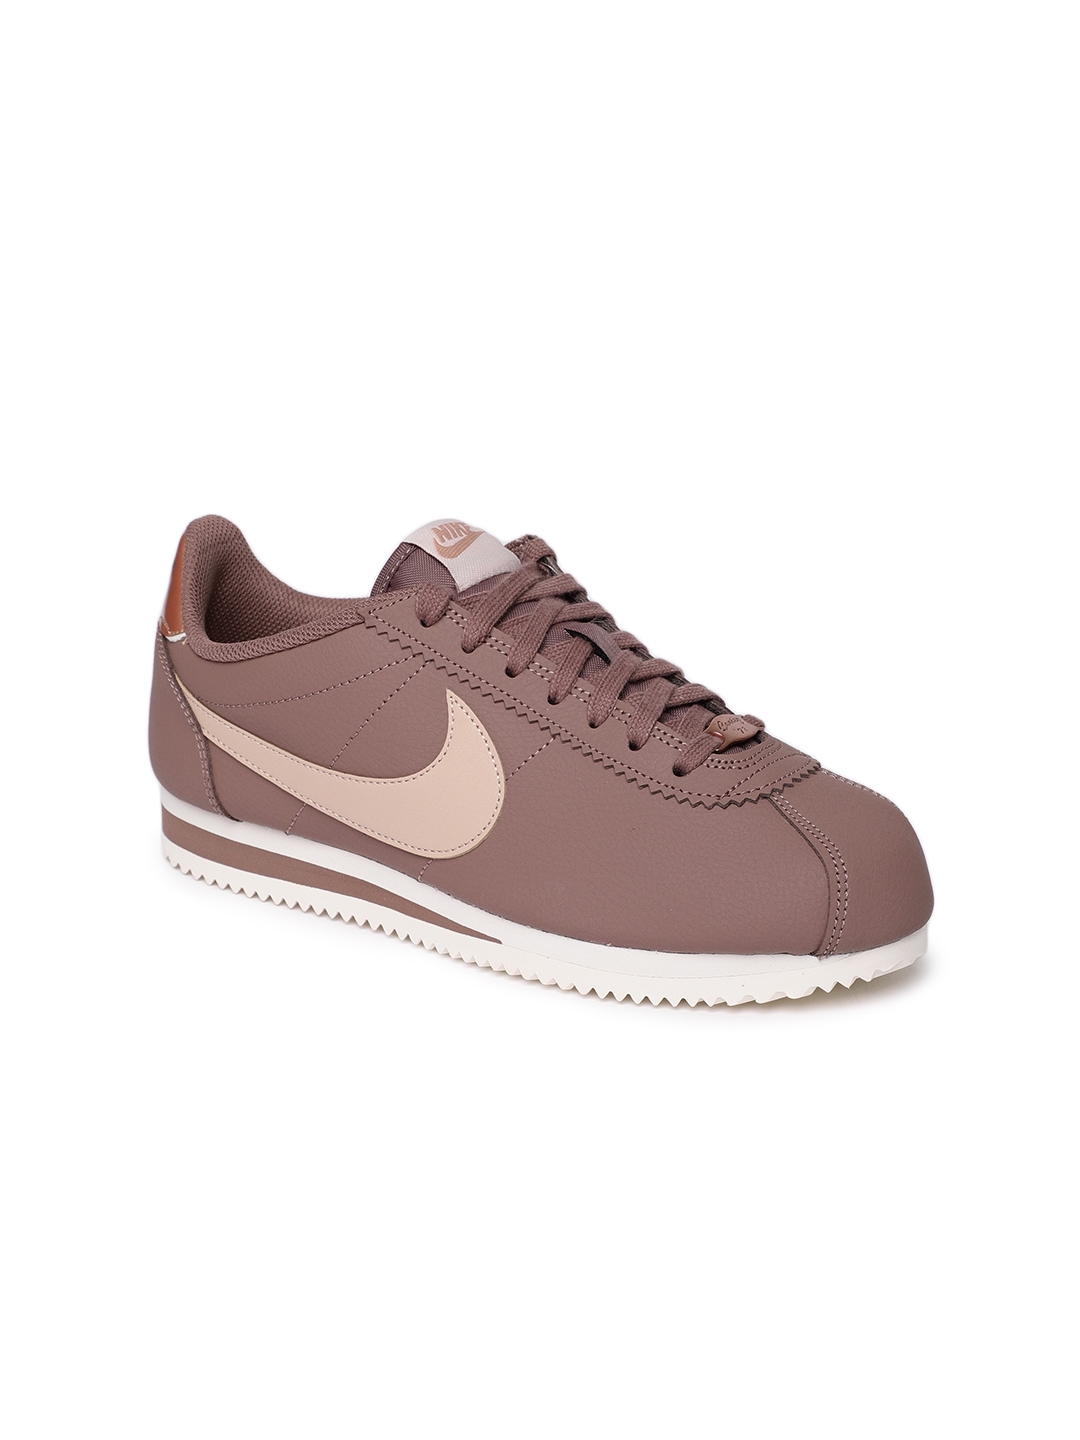 nike brown leather shoes womens